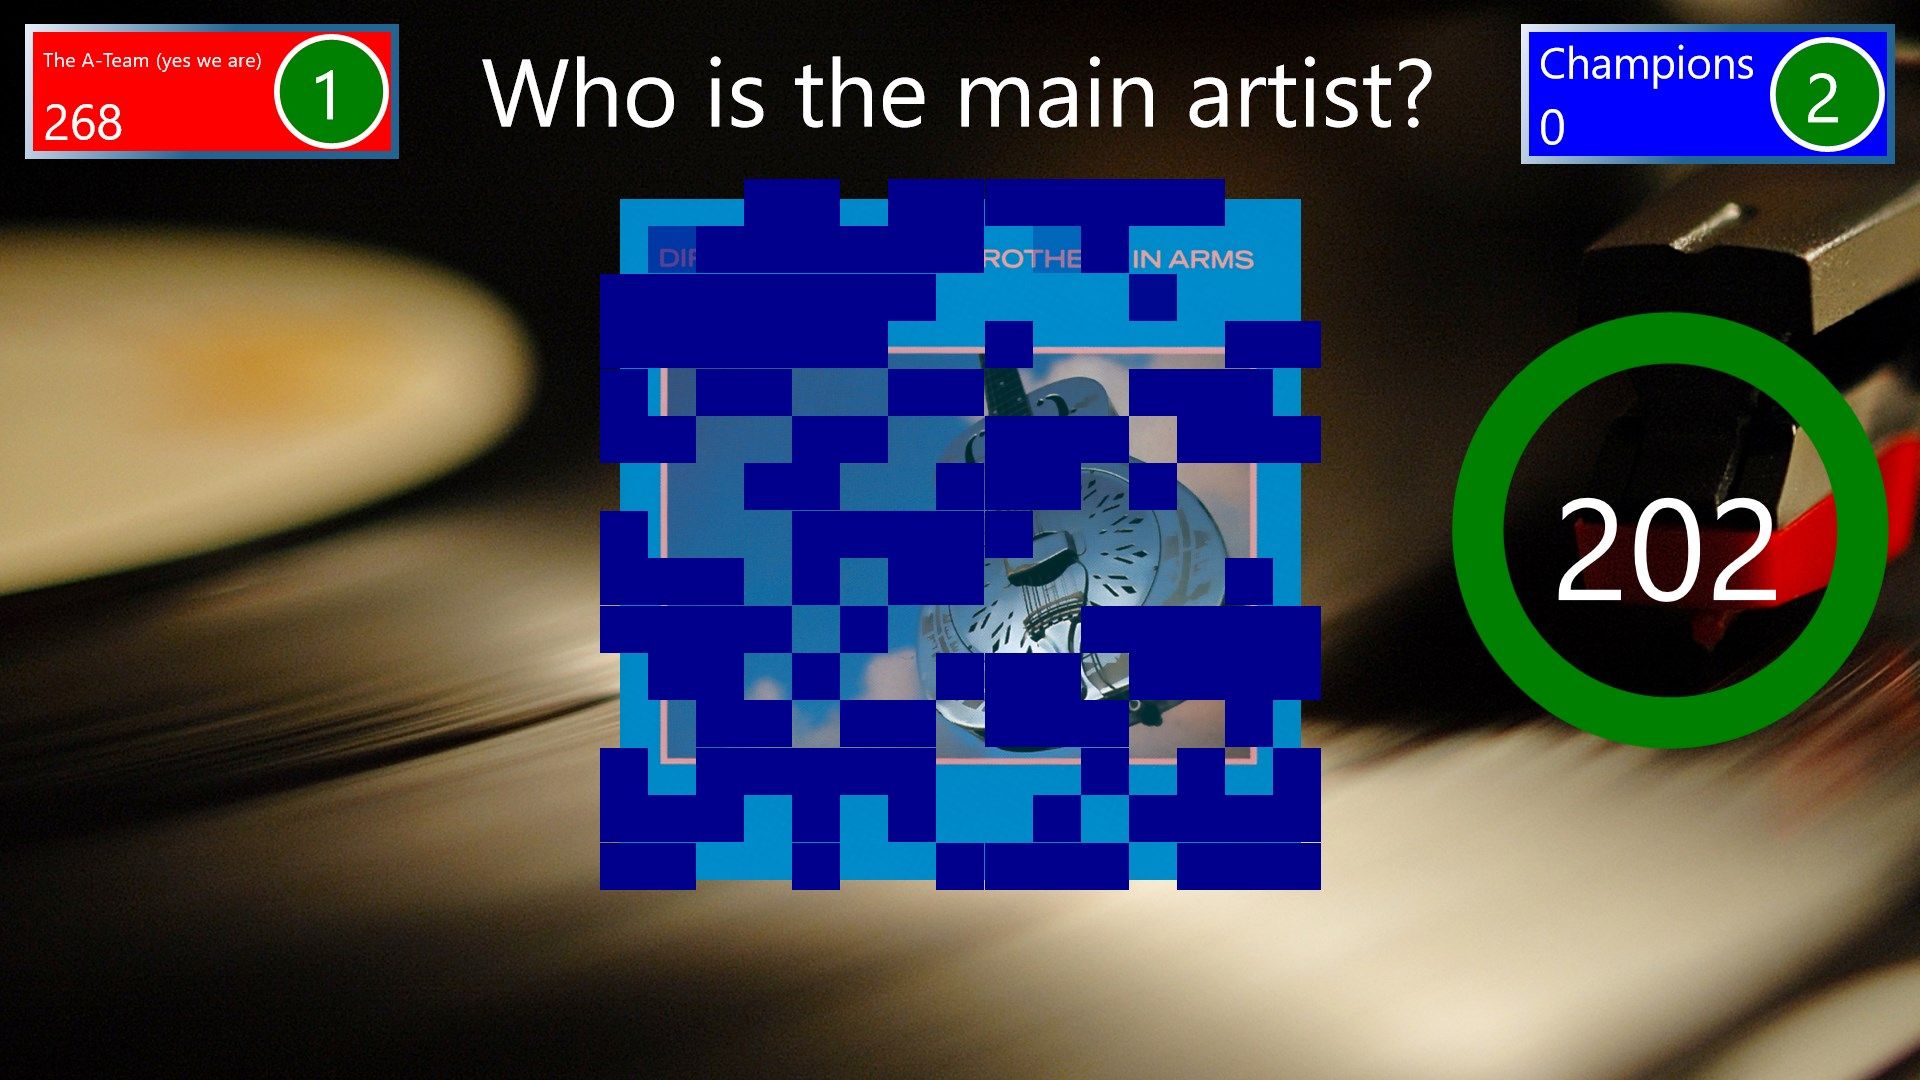 Guess the artist. The album art is gradually shown. Buzz when you know!